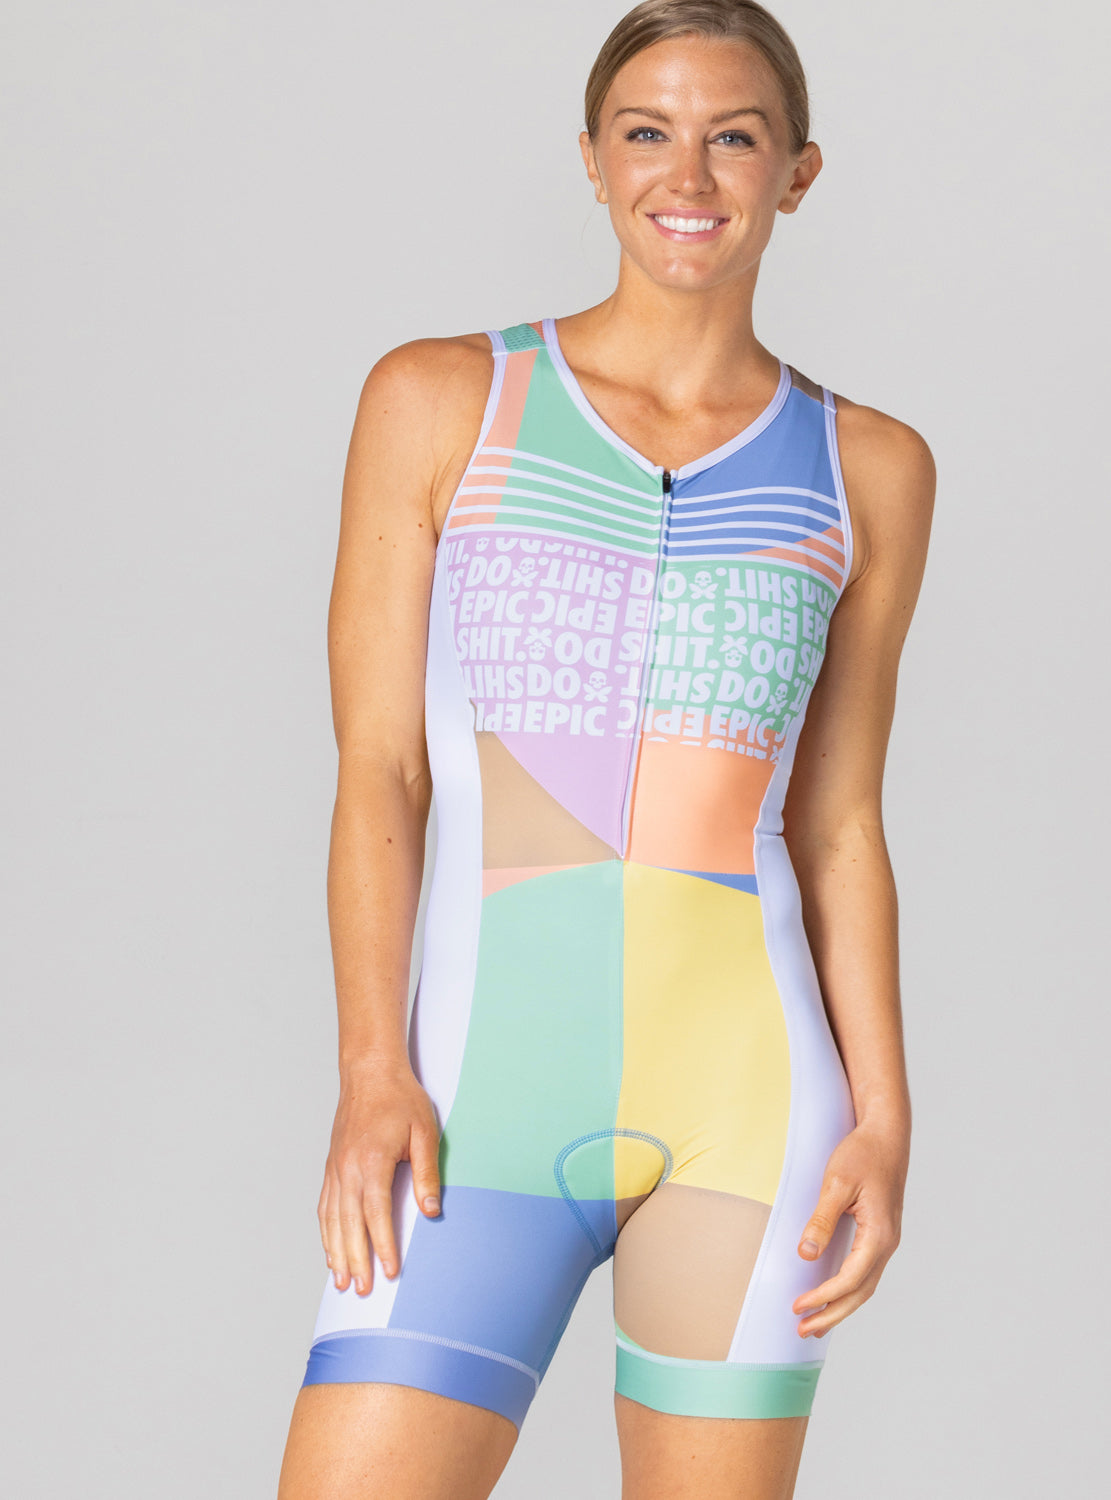 betty designs do epic shit womens sleeveless tri suit